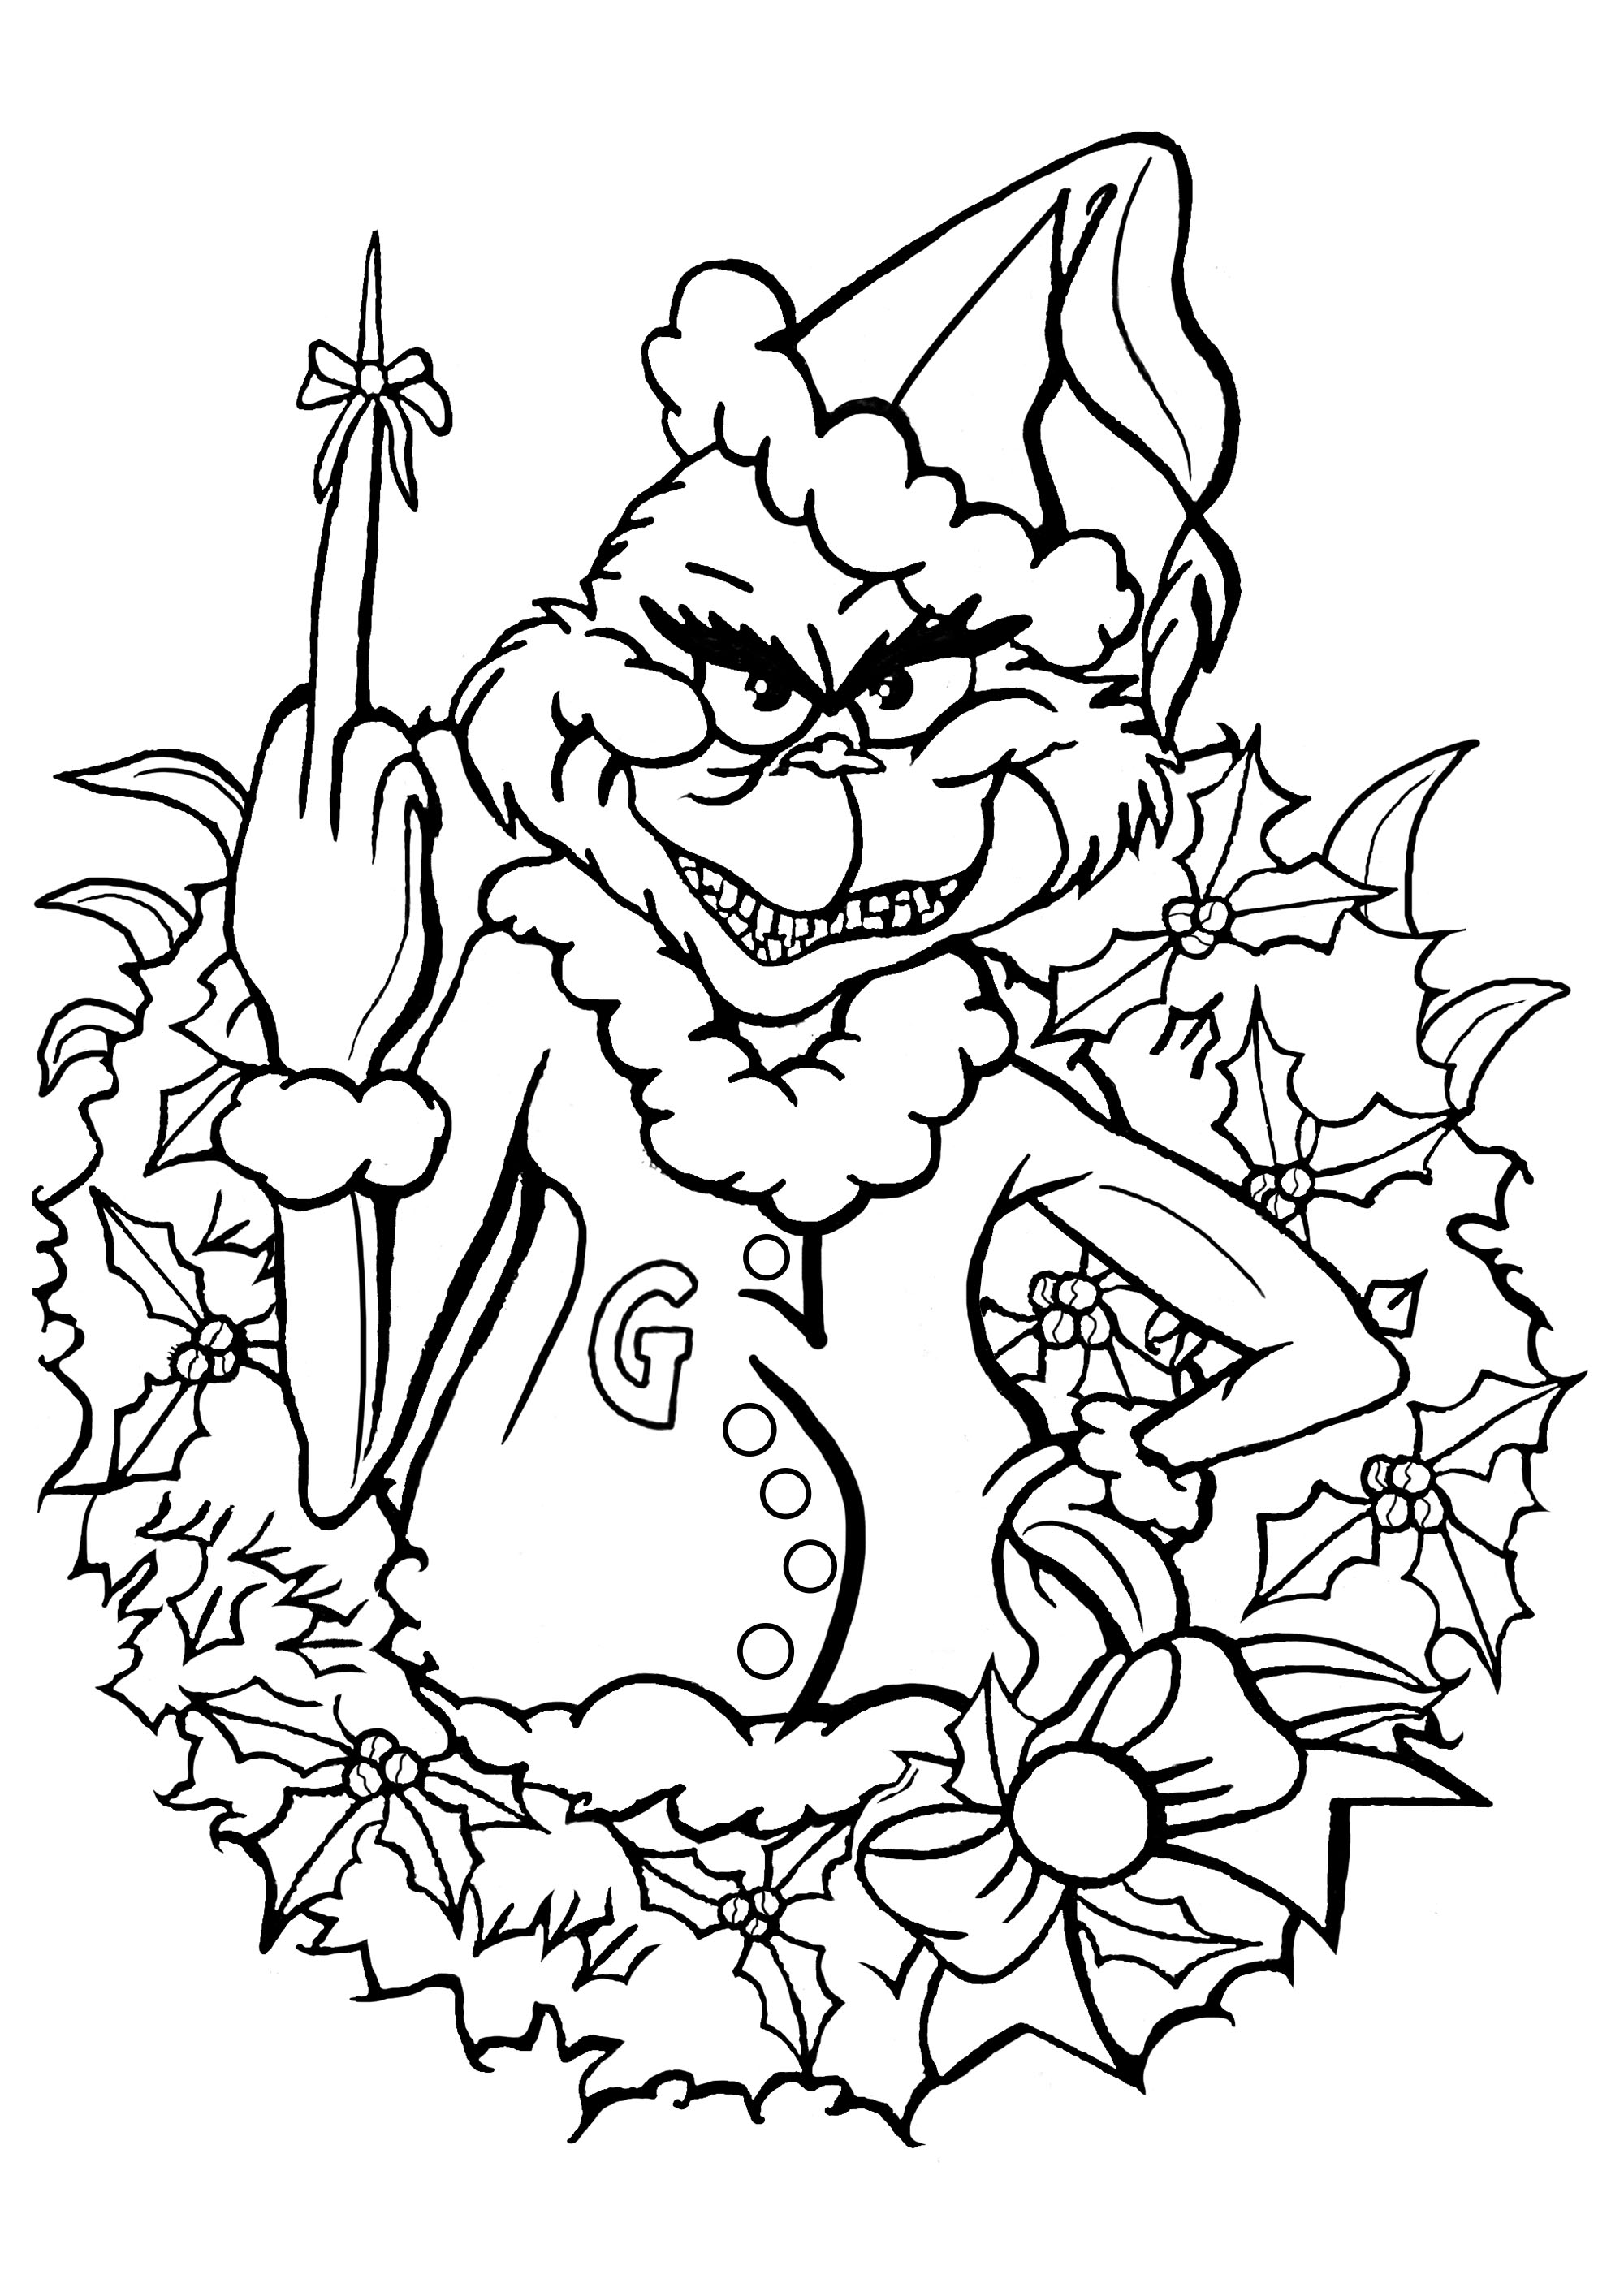 Illumination The Grinch Coloring Pages Free Coloring Pages